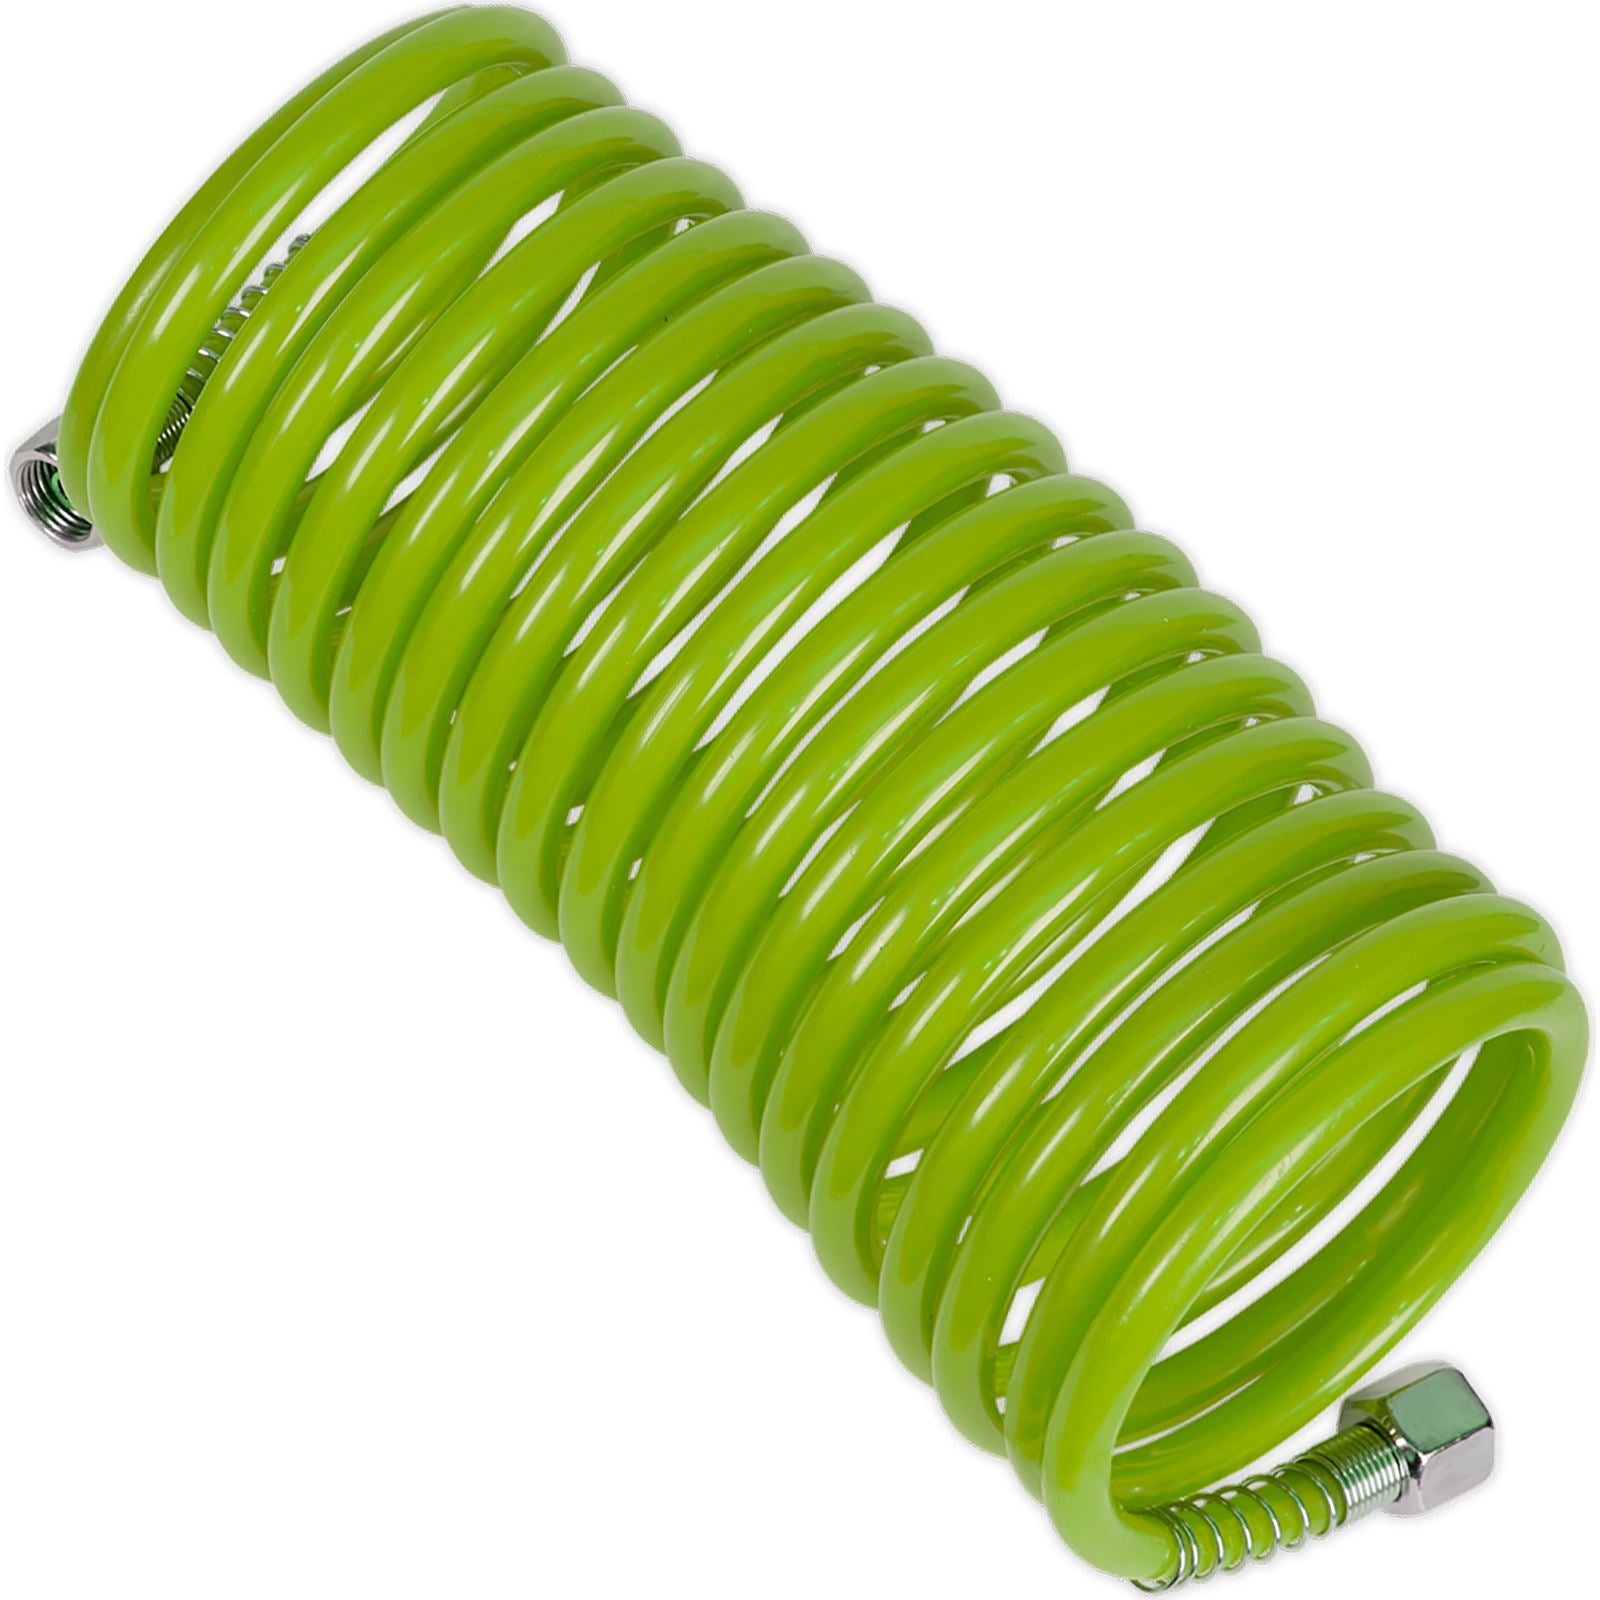 Sealey Hi-Vis Green 5m x Ø5mm Coiled Air Hose With 1/4" Female Couplers Recoil